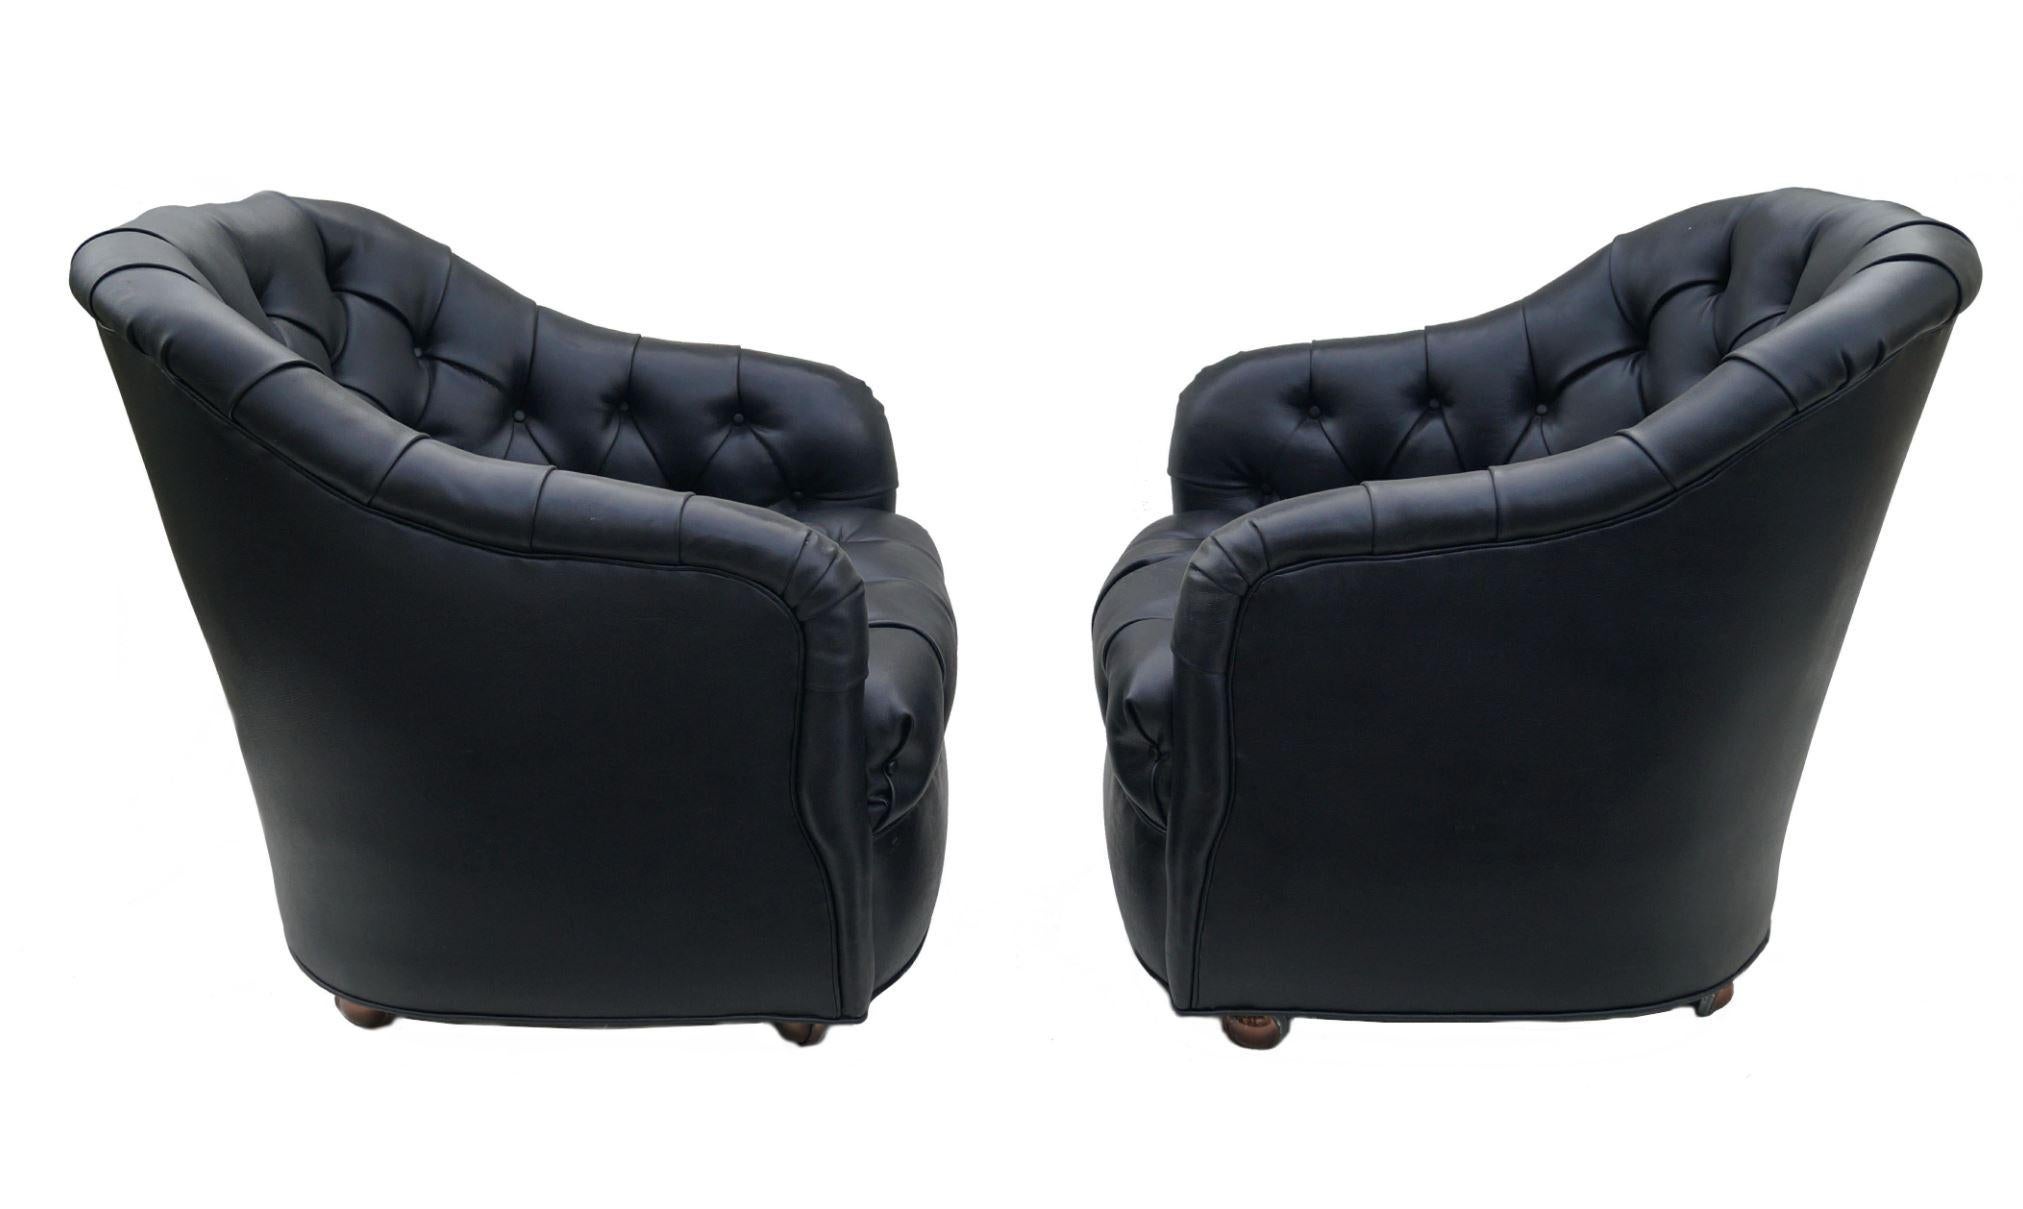 Pair of Black Mid-Century Modern Ward Bennett Style Tufted Lounge Chairs Casters For Sale 1